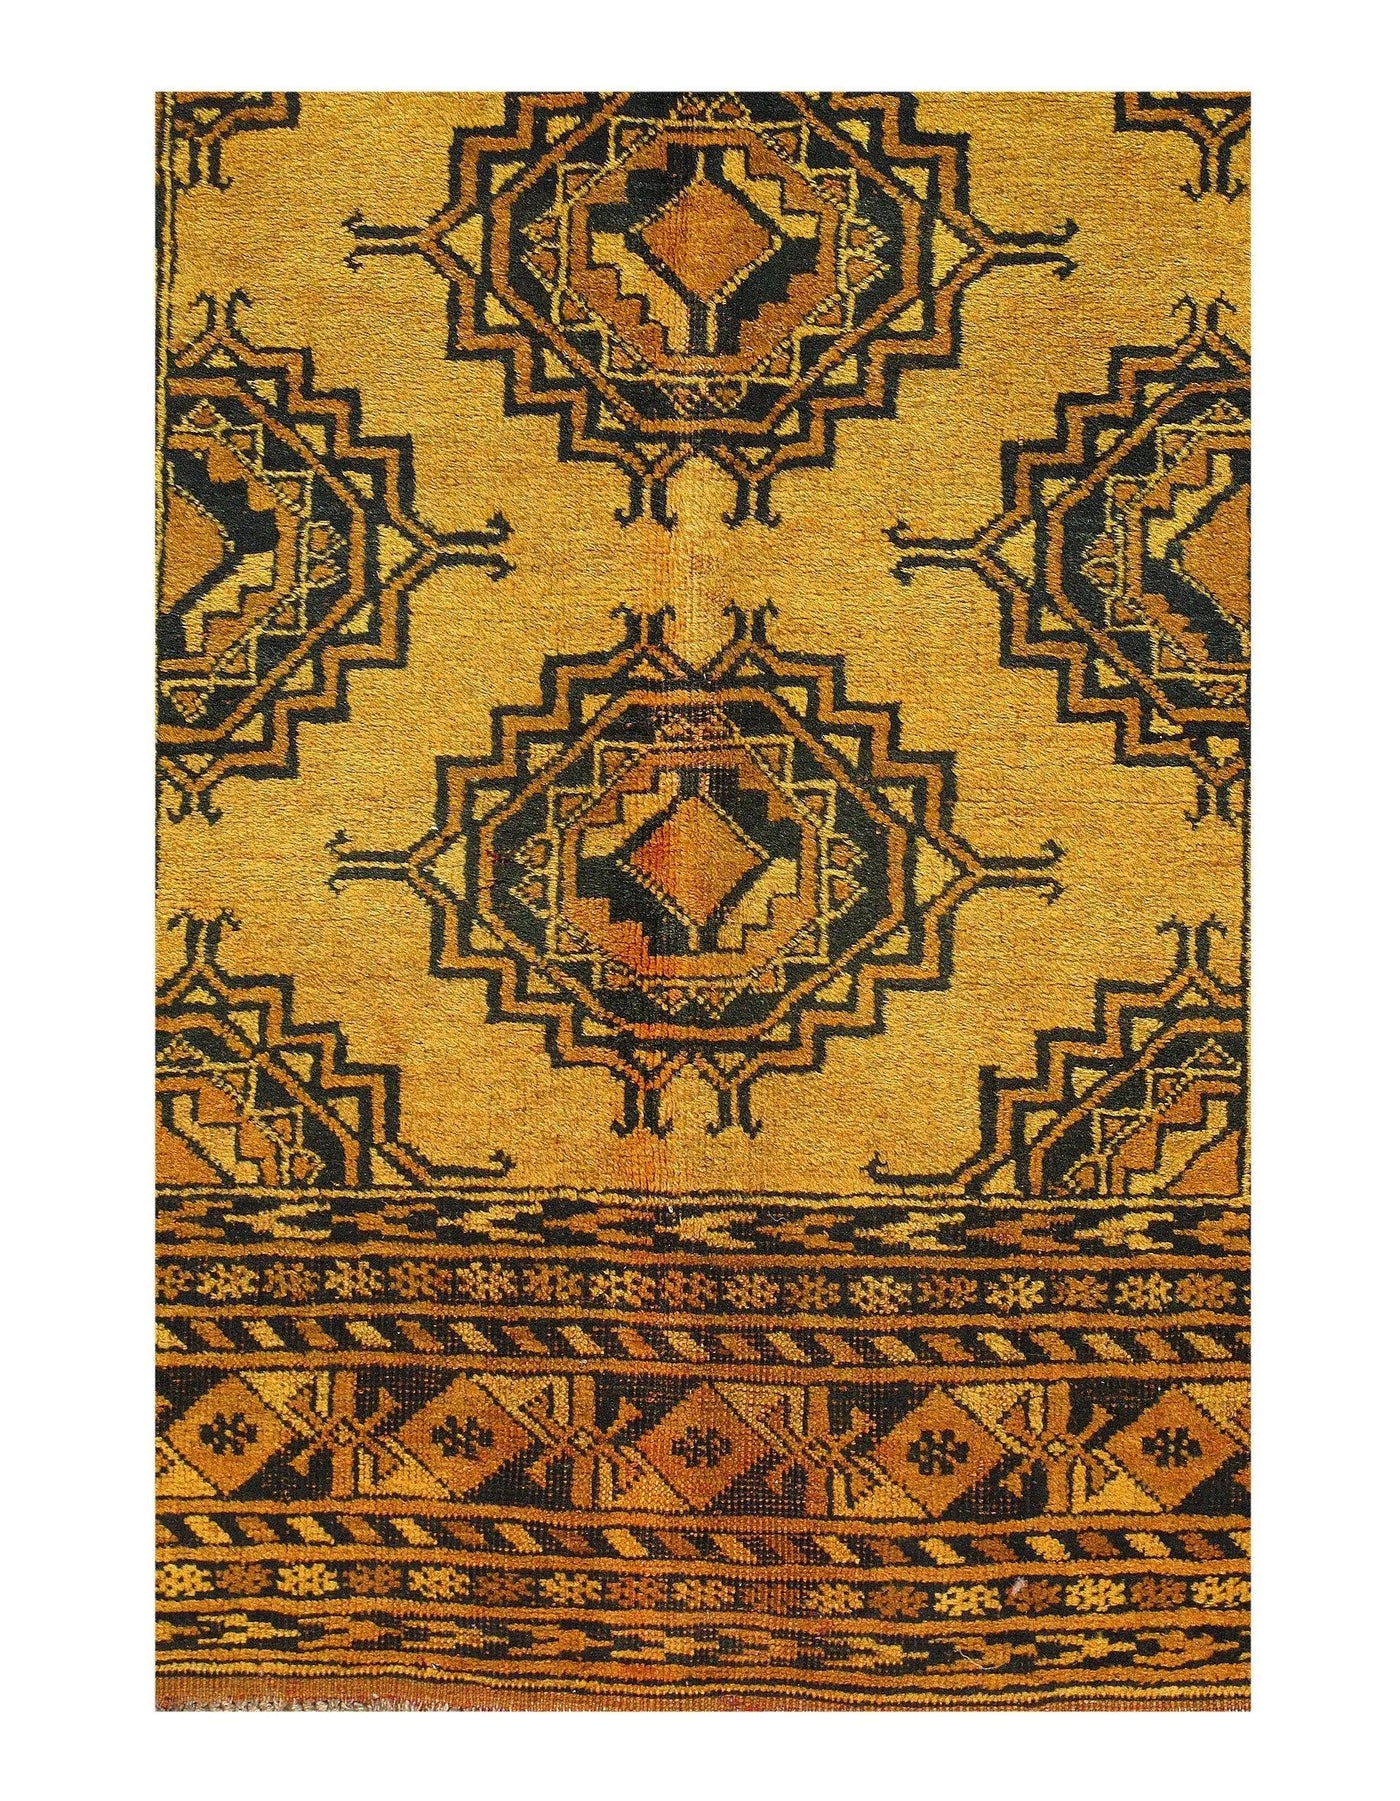 Gold Color Antique Afghani Yamoud Rug - 4'4'' X 6'8''